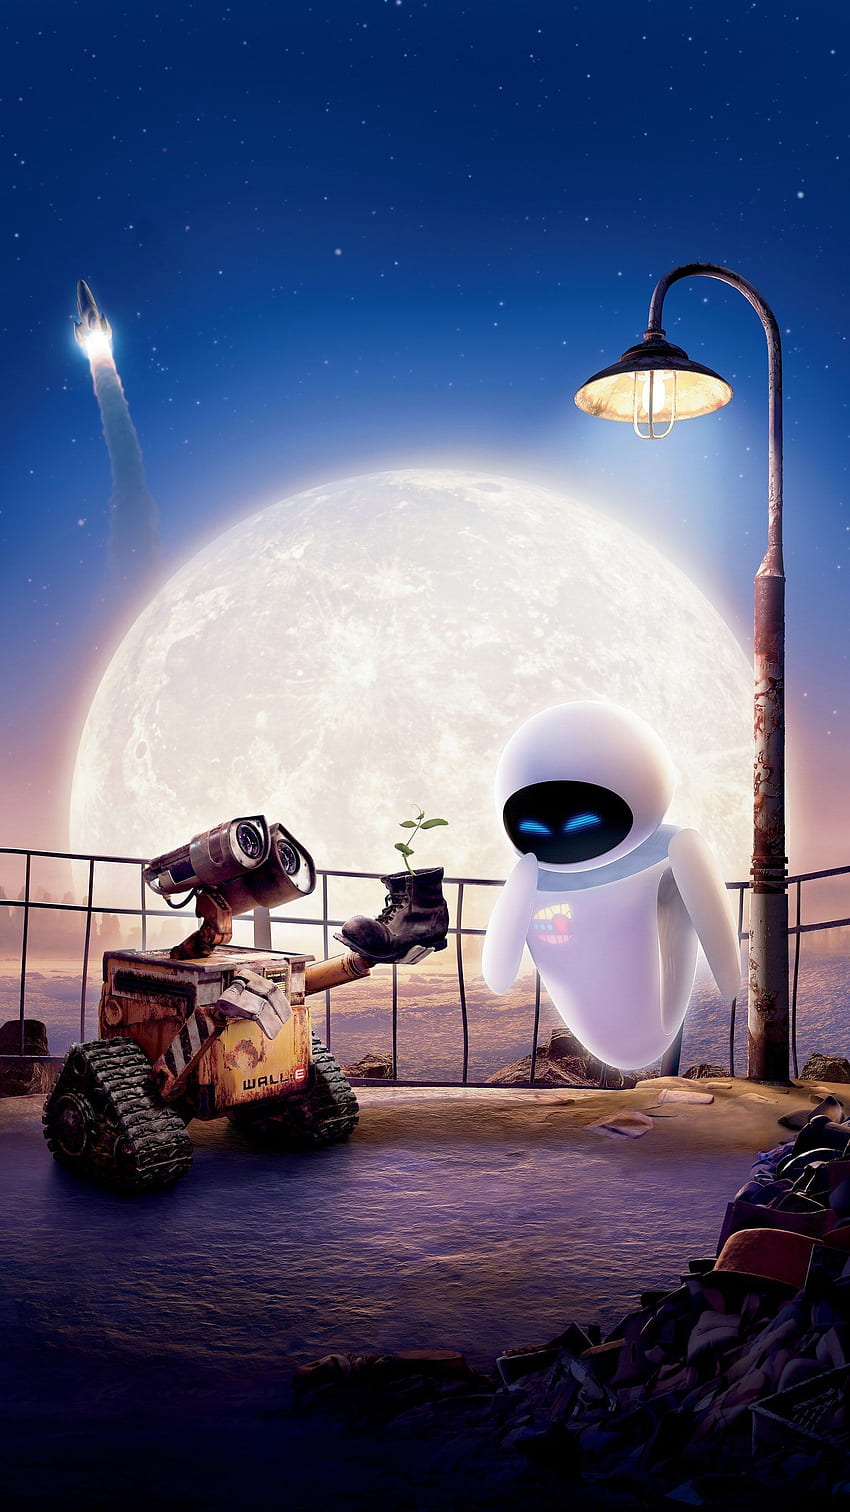 Wall e wallpaper by kingboy24  Download on ZEDGE  a69c